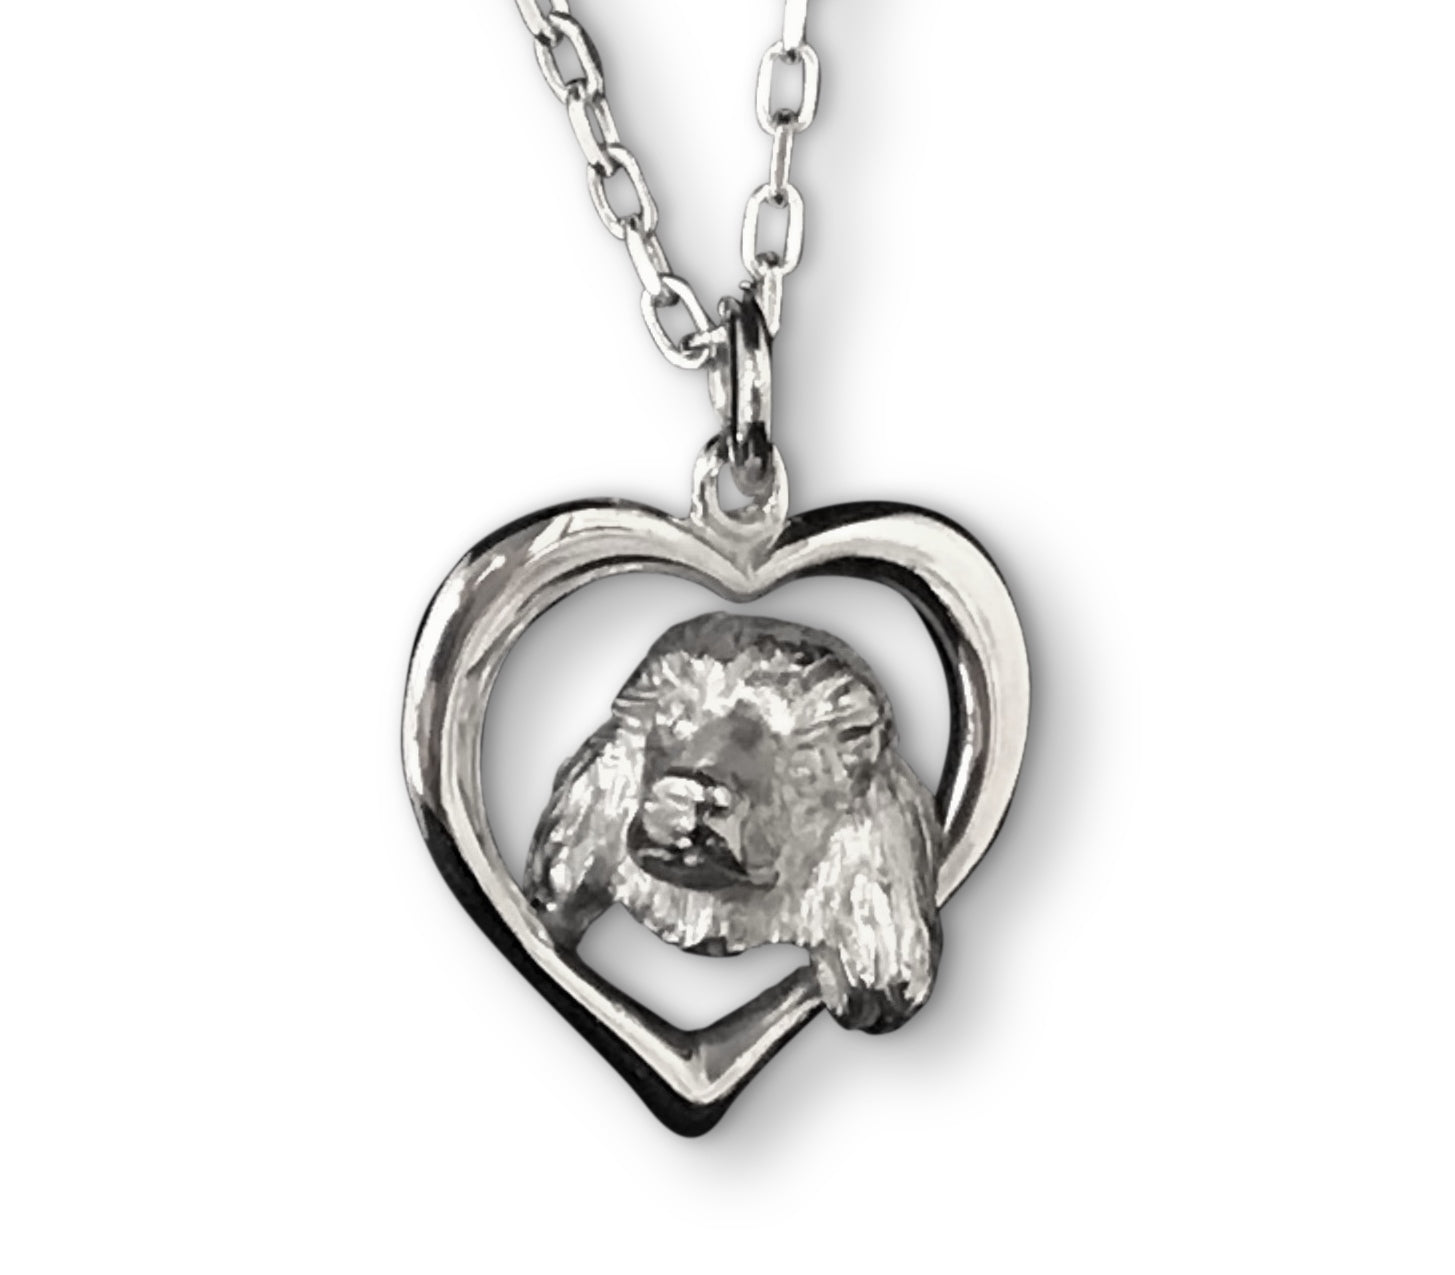 Poodle in a Heart Pendant by Paul Eaton